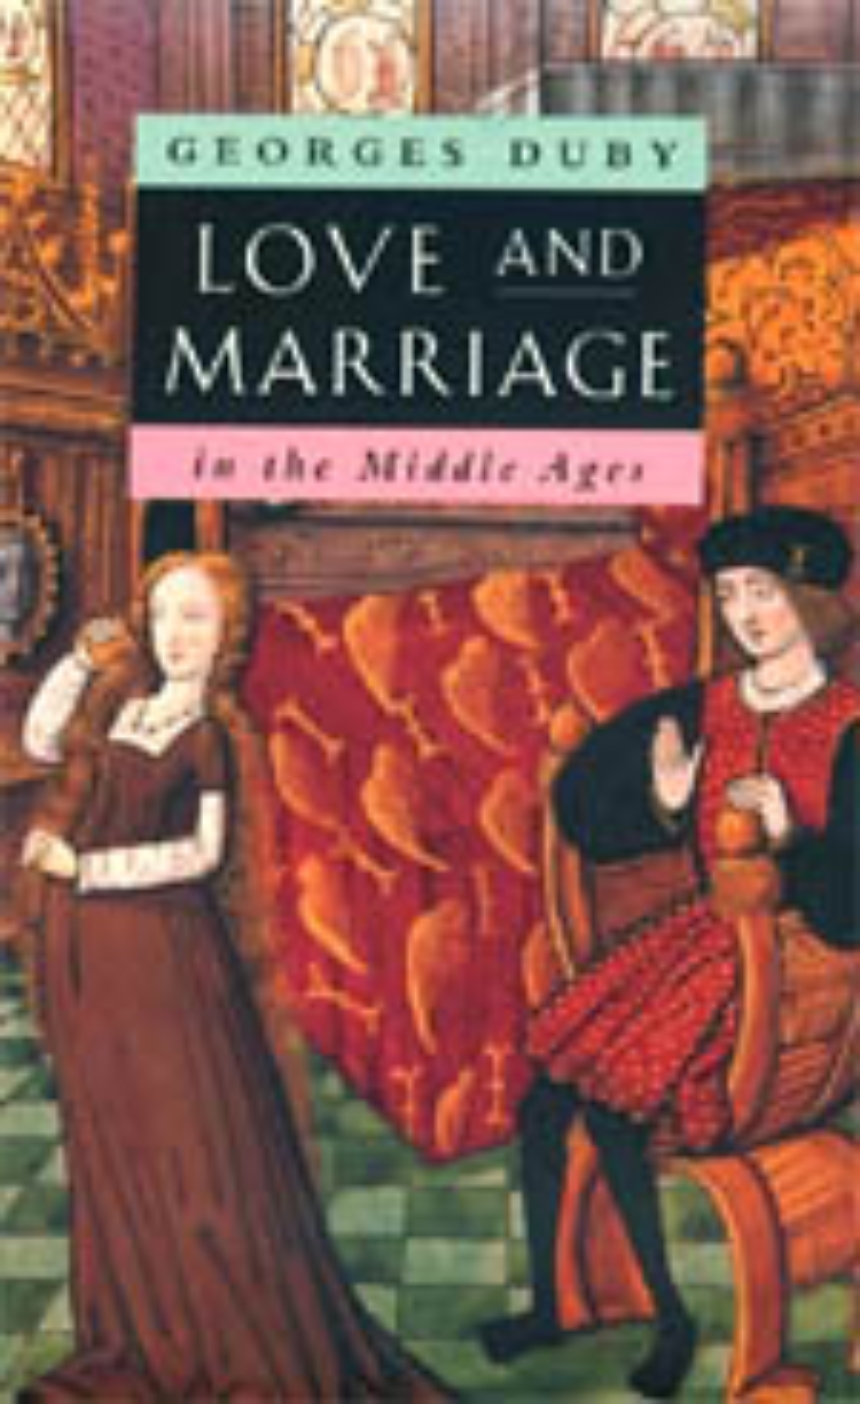 Love and Marriage in the Middle Ages